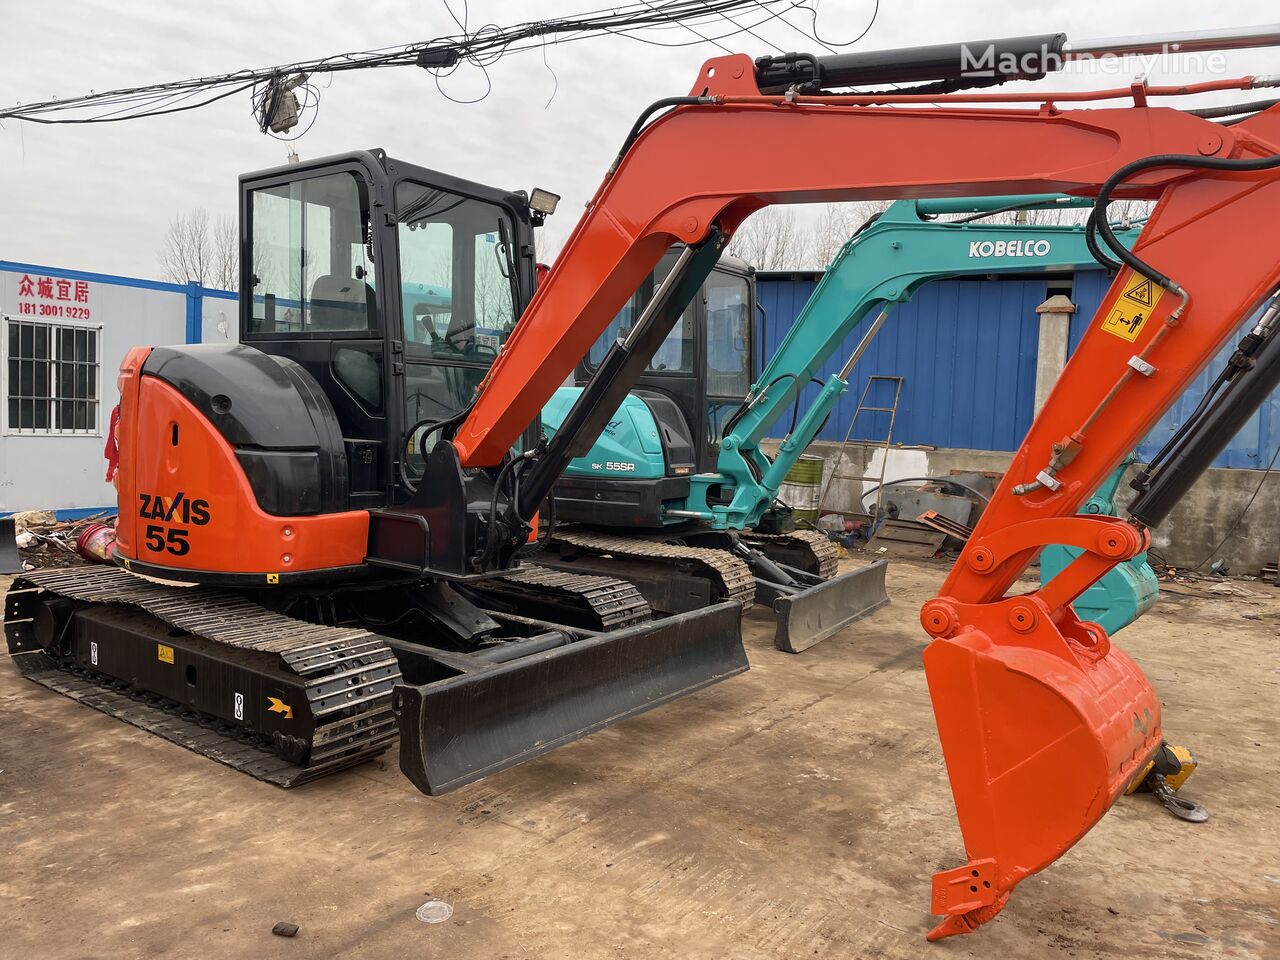 Hitachi ZX55 tracked excavator for sale China He Fei Shi, UF38047